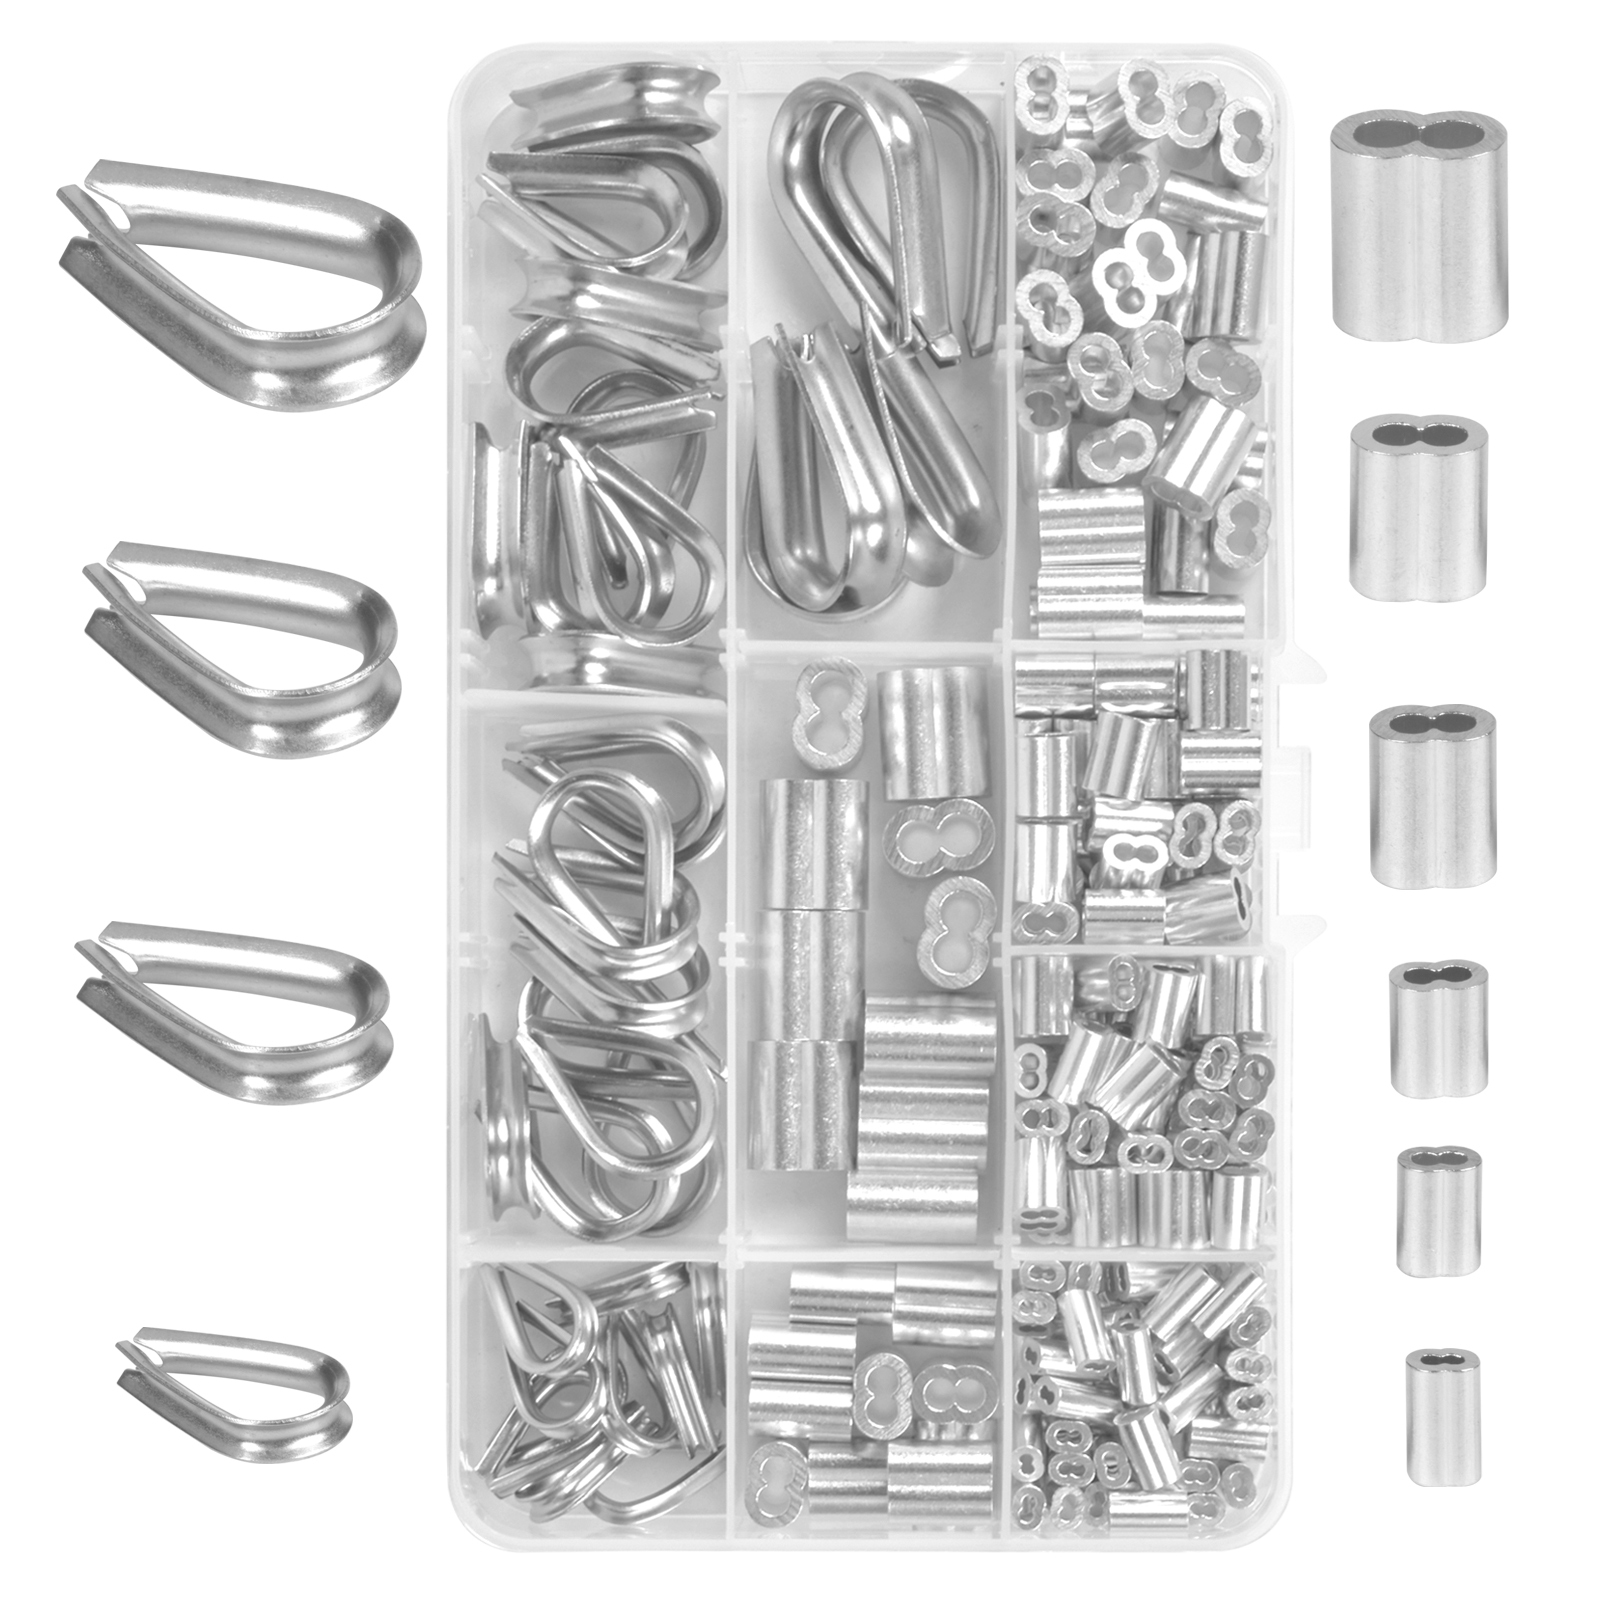 225pcs Stainless Steel Wire Rope Thimbles And Sleeves Set, M1.2-M5 Thimbles  And Aluminum Crimping Loop Sleeves Clips Assortment Kit, Wire Clamps Kit F